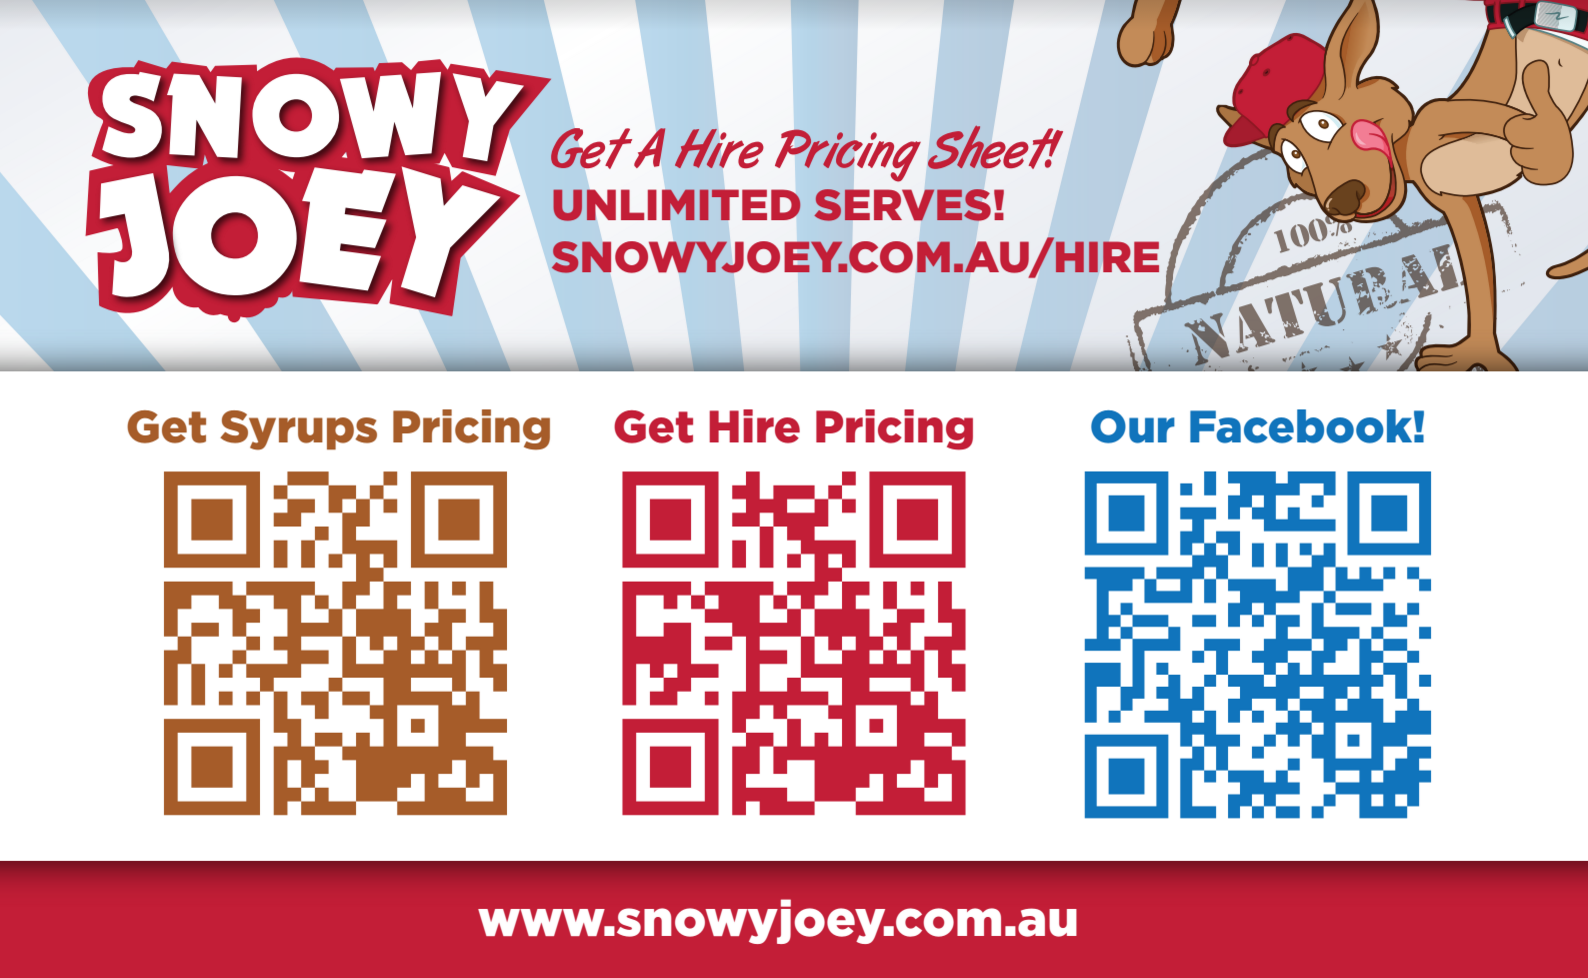 Screenshot showing a Snowy Joey flyer with QR codes to different links